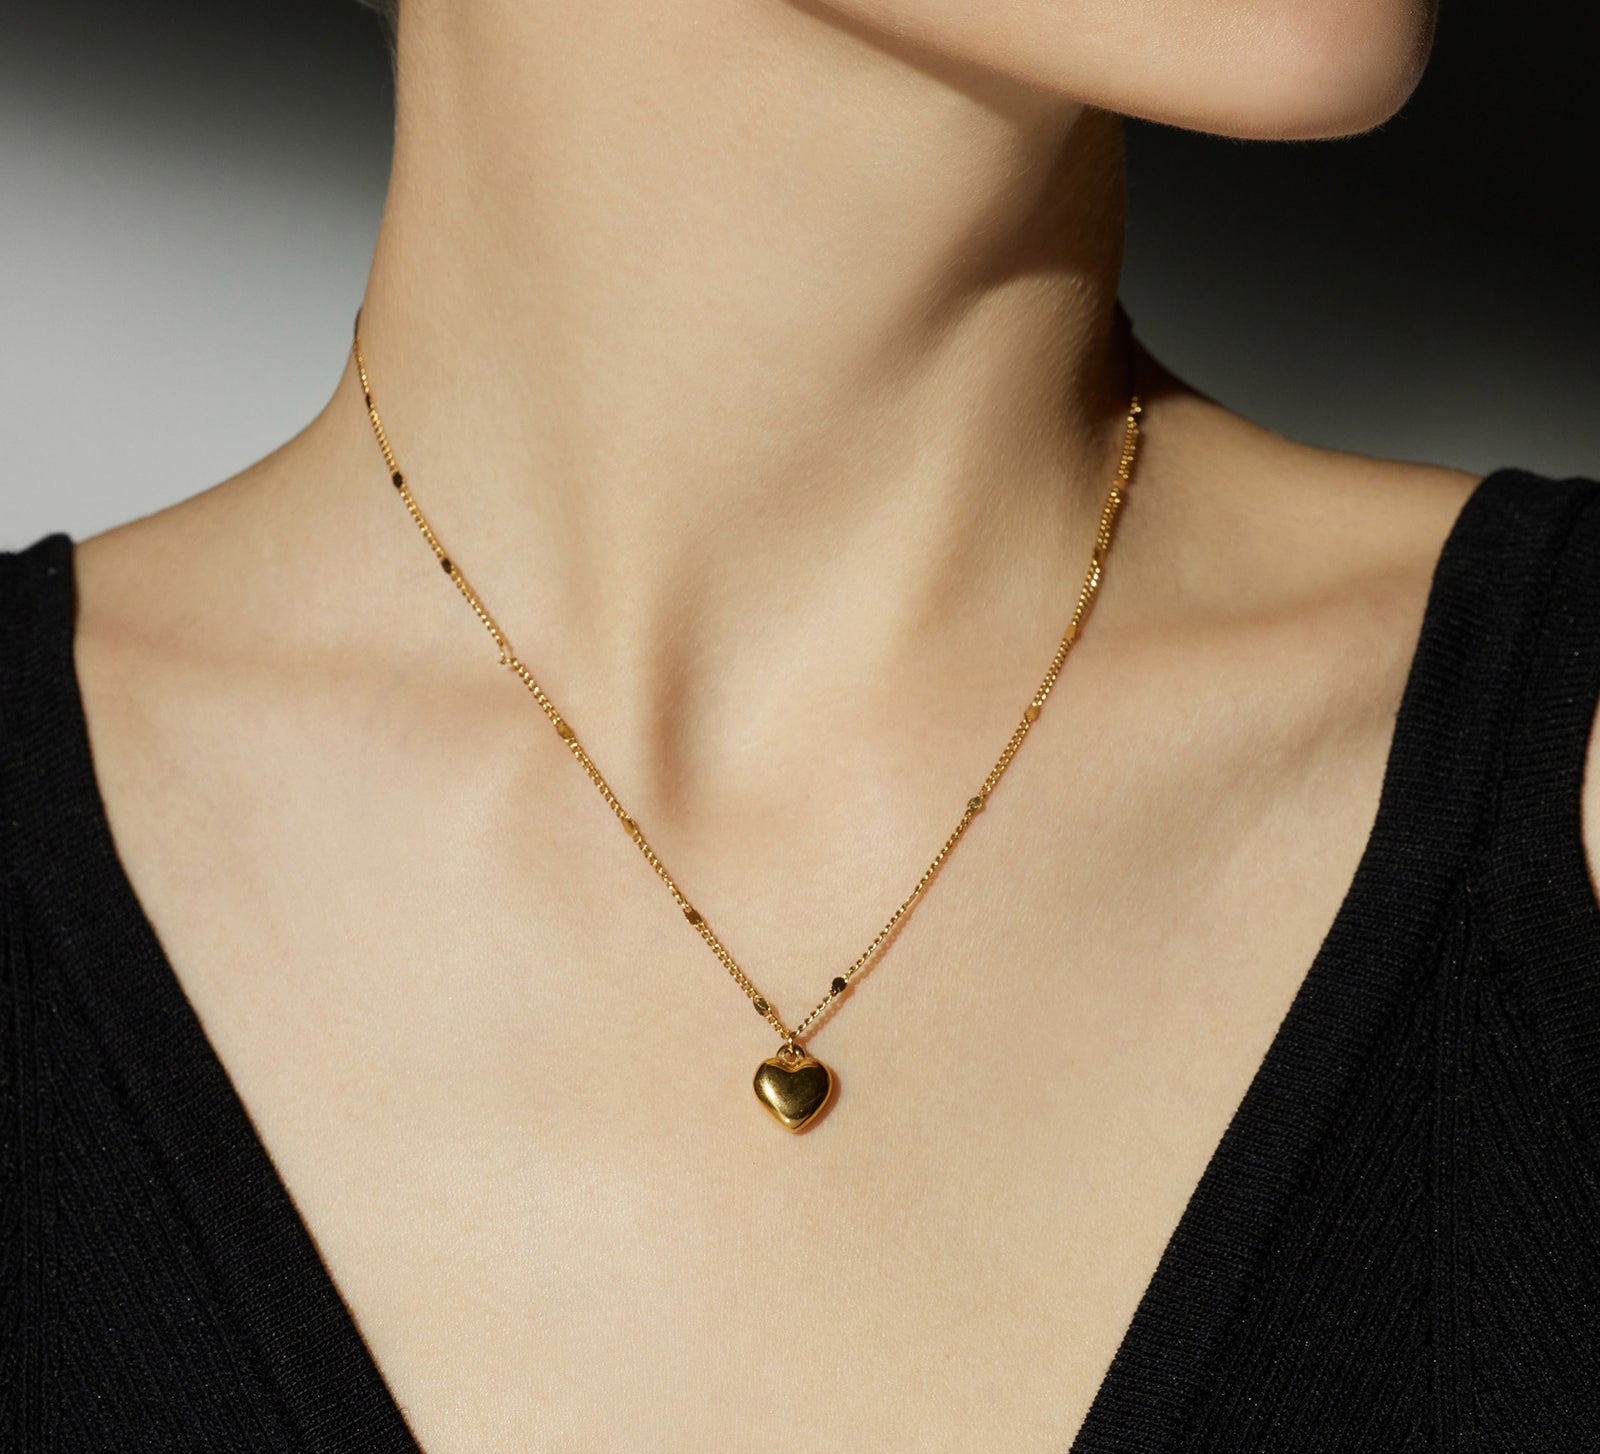 Gold Heart Pendant Necklace, a chic gold accent that enhances your style, featuring a stylish heart-shaped pendant in a lustrous gold hue.